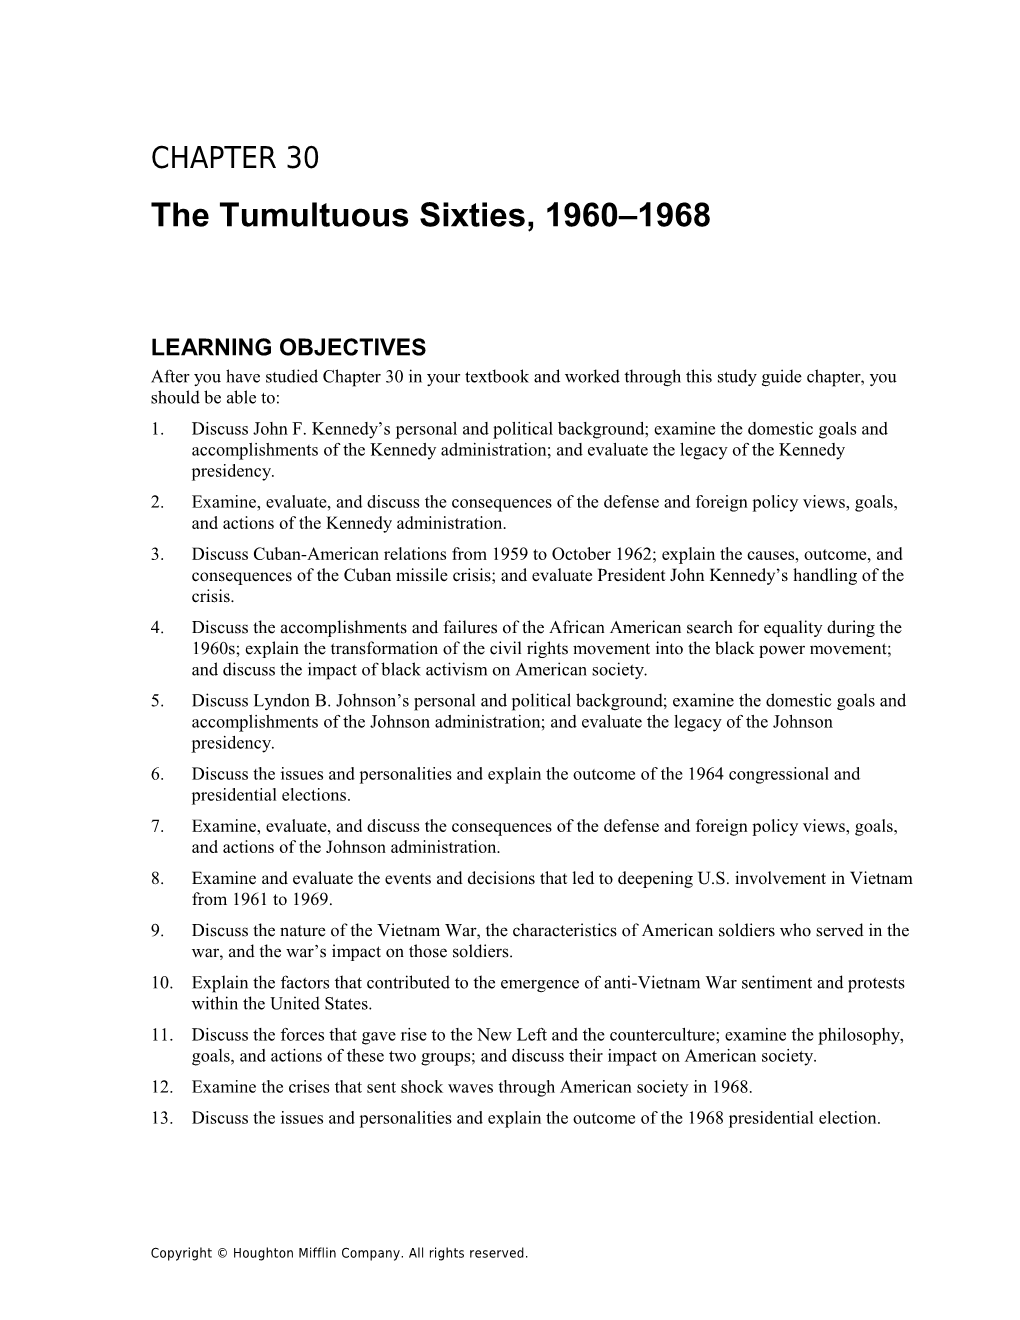 Chapter 30: the Tumultuous Sixties, 1960 1968 1